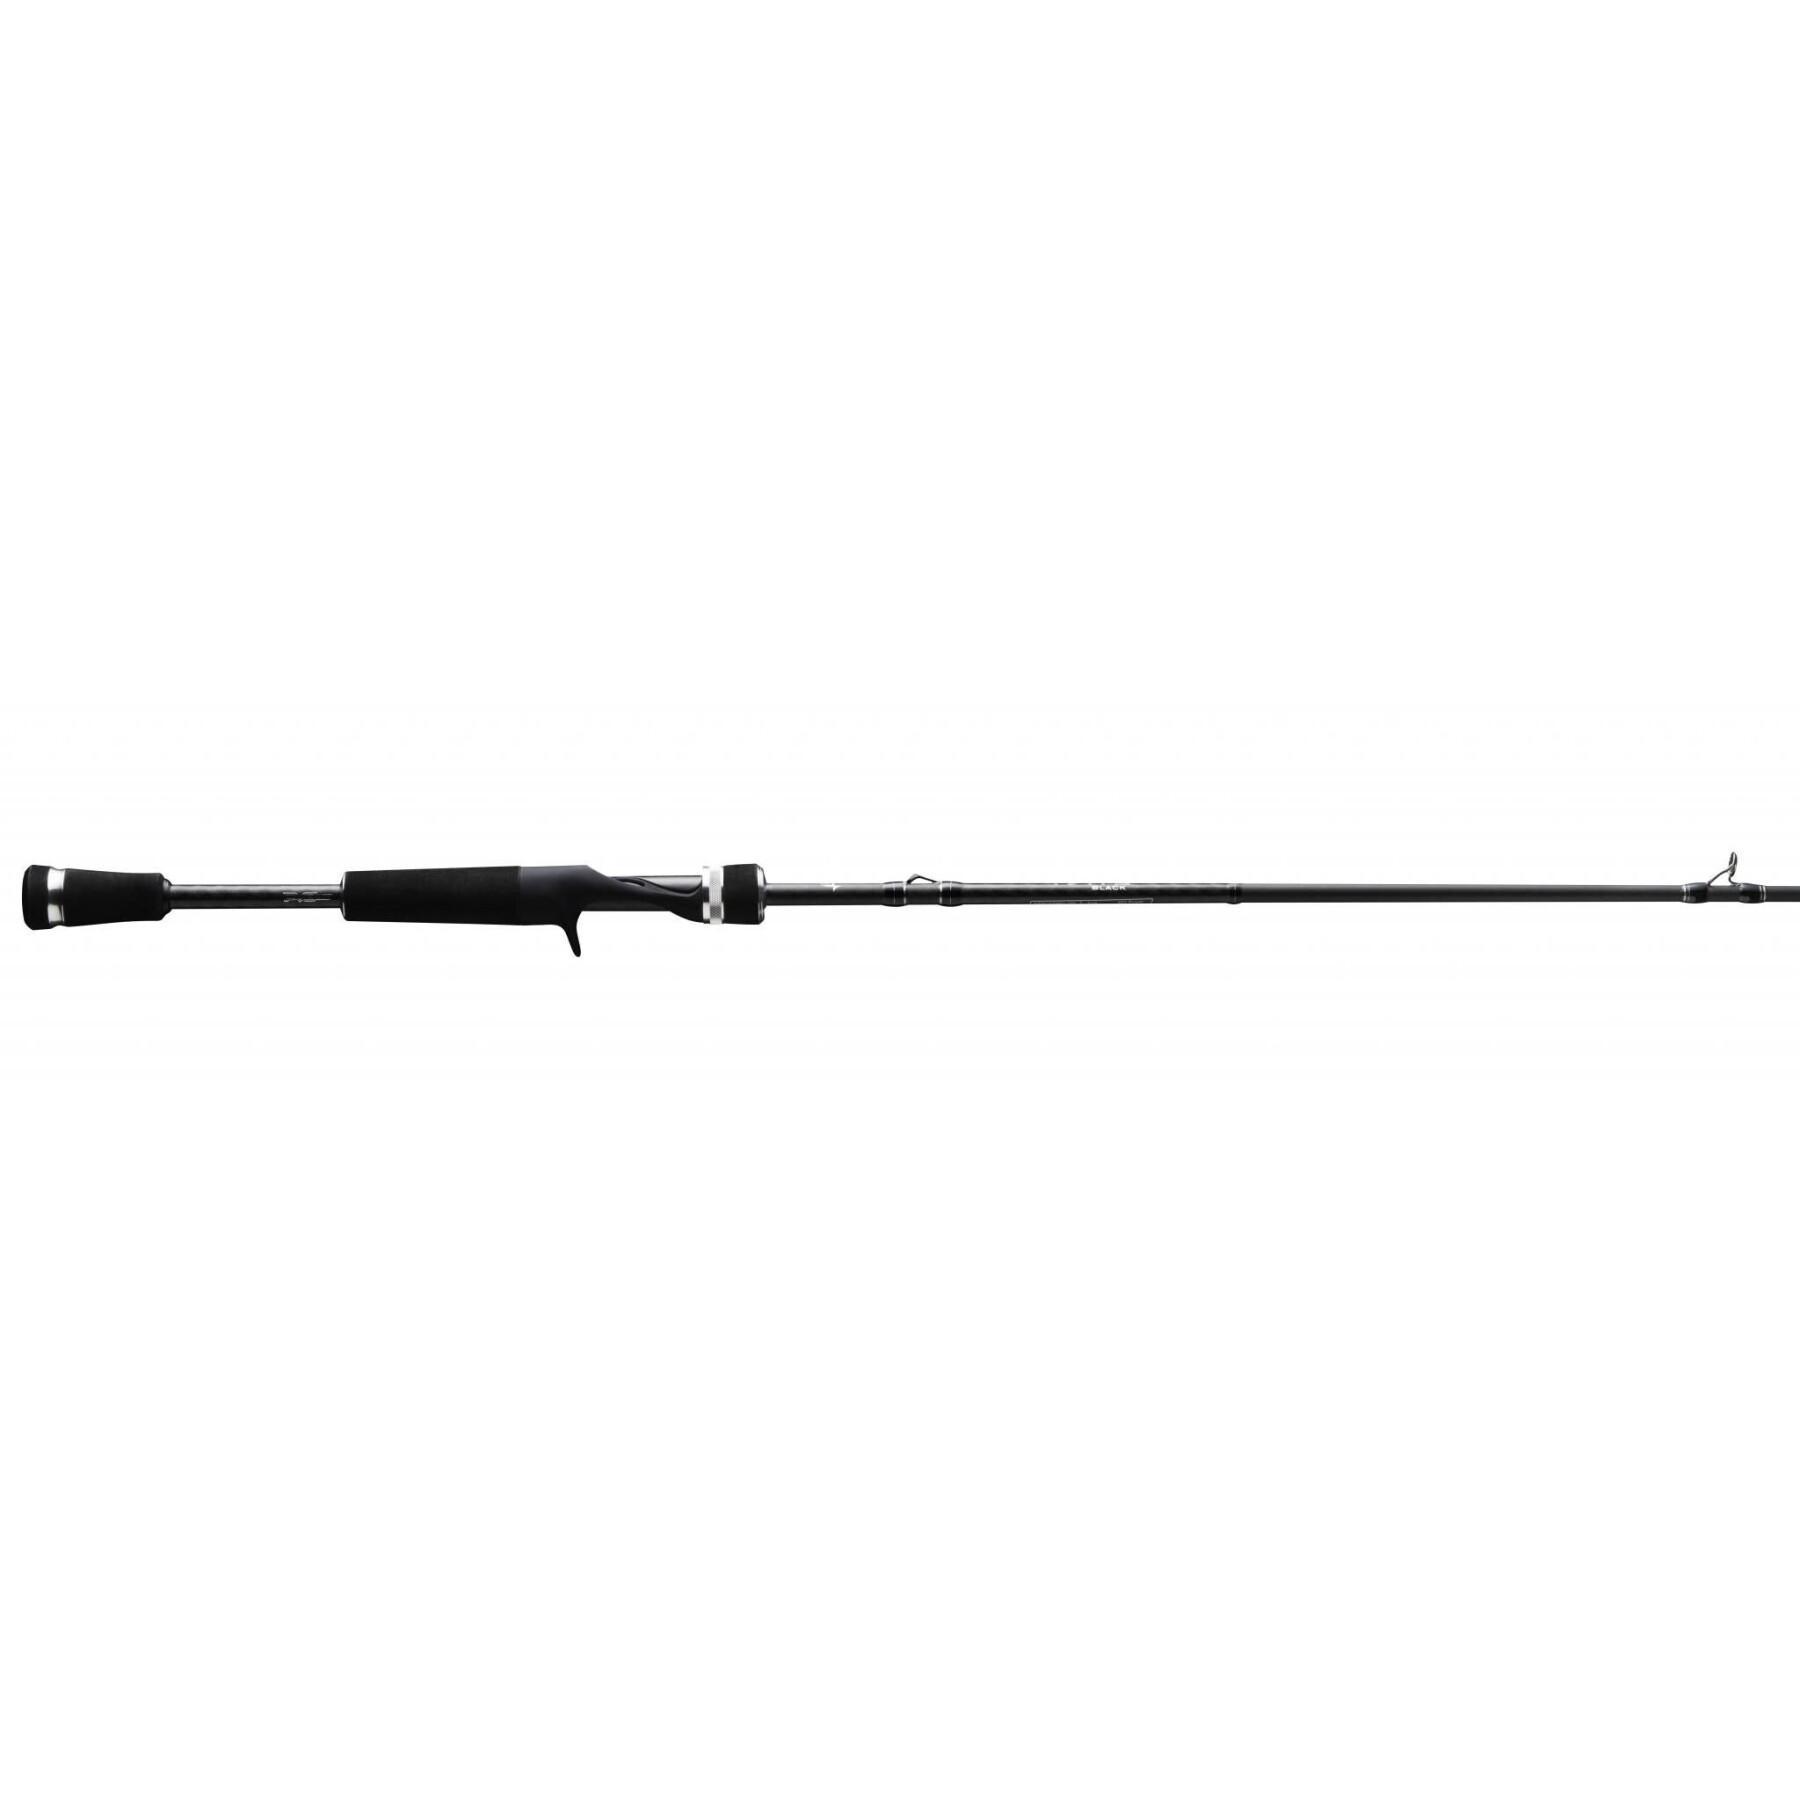 Cane casting 13 Fishing Fate 100-300g